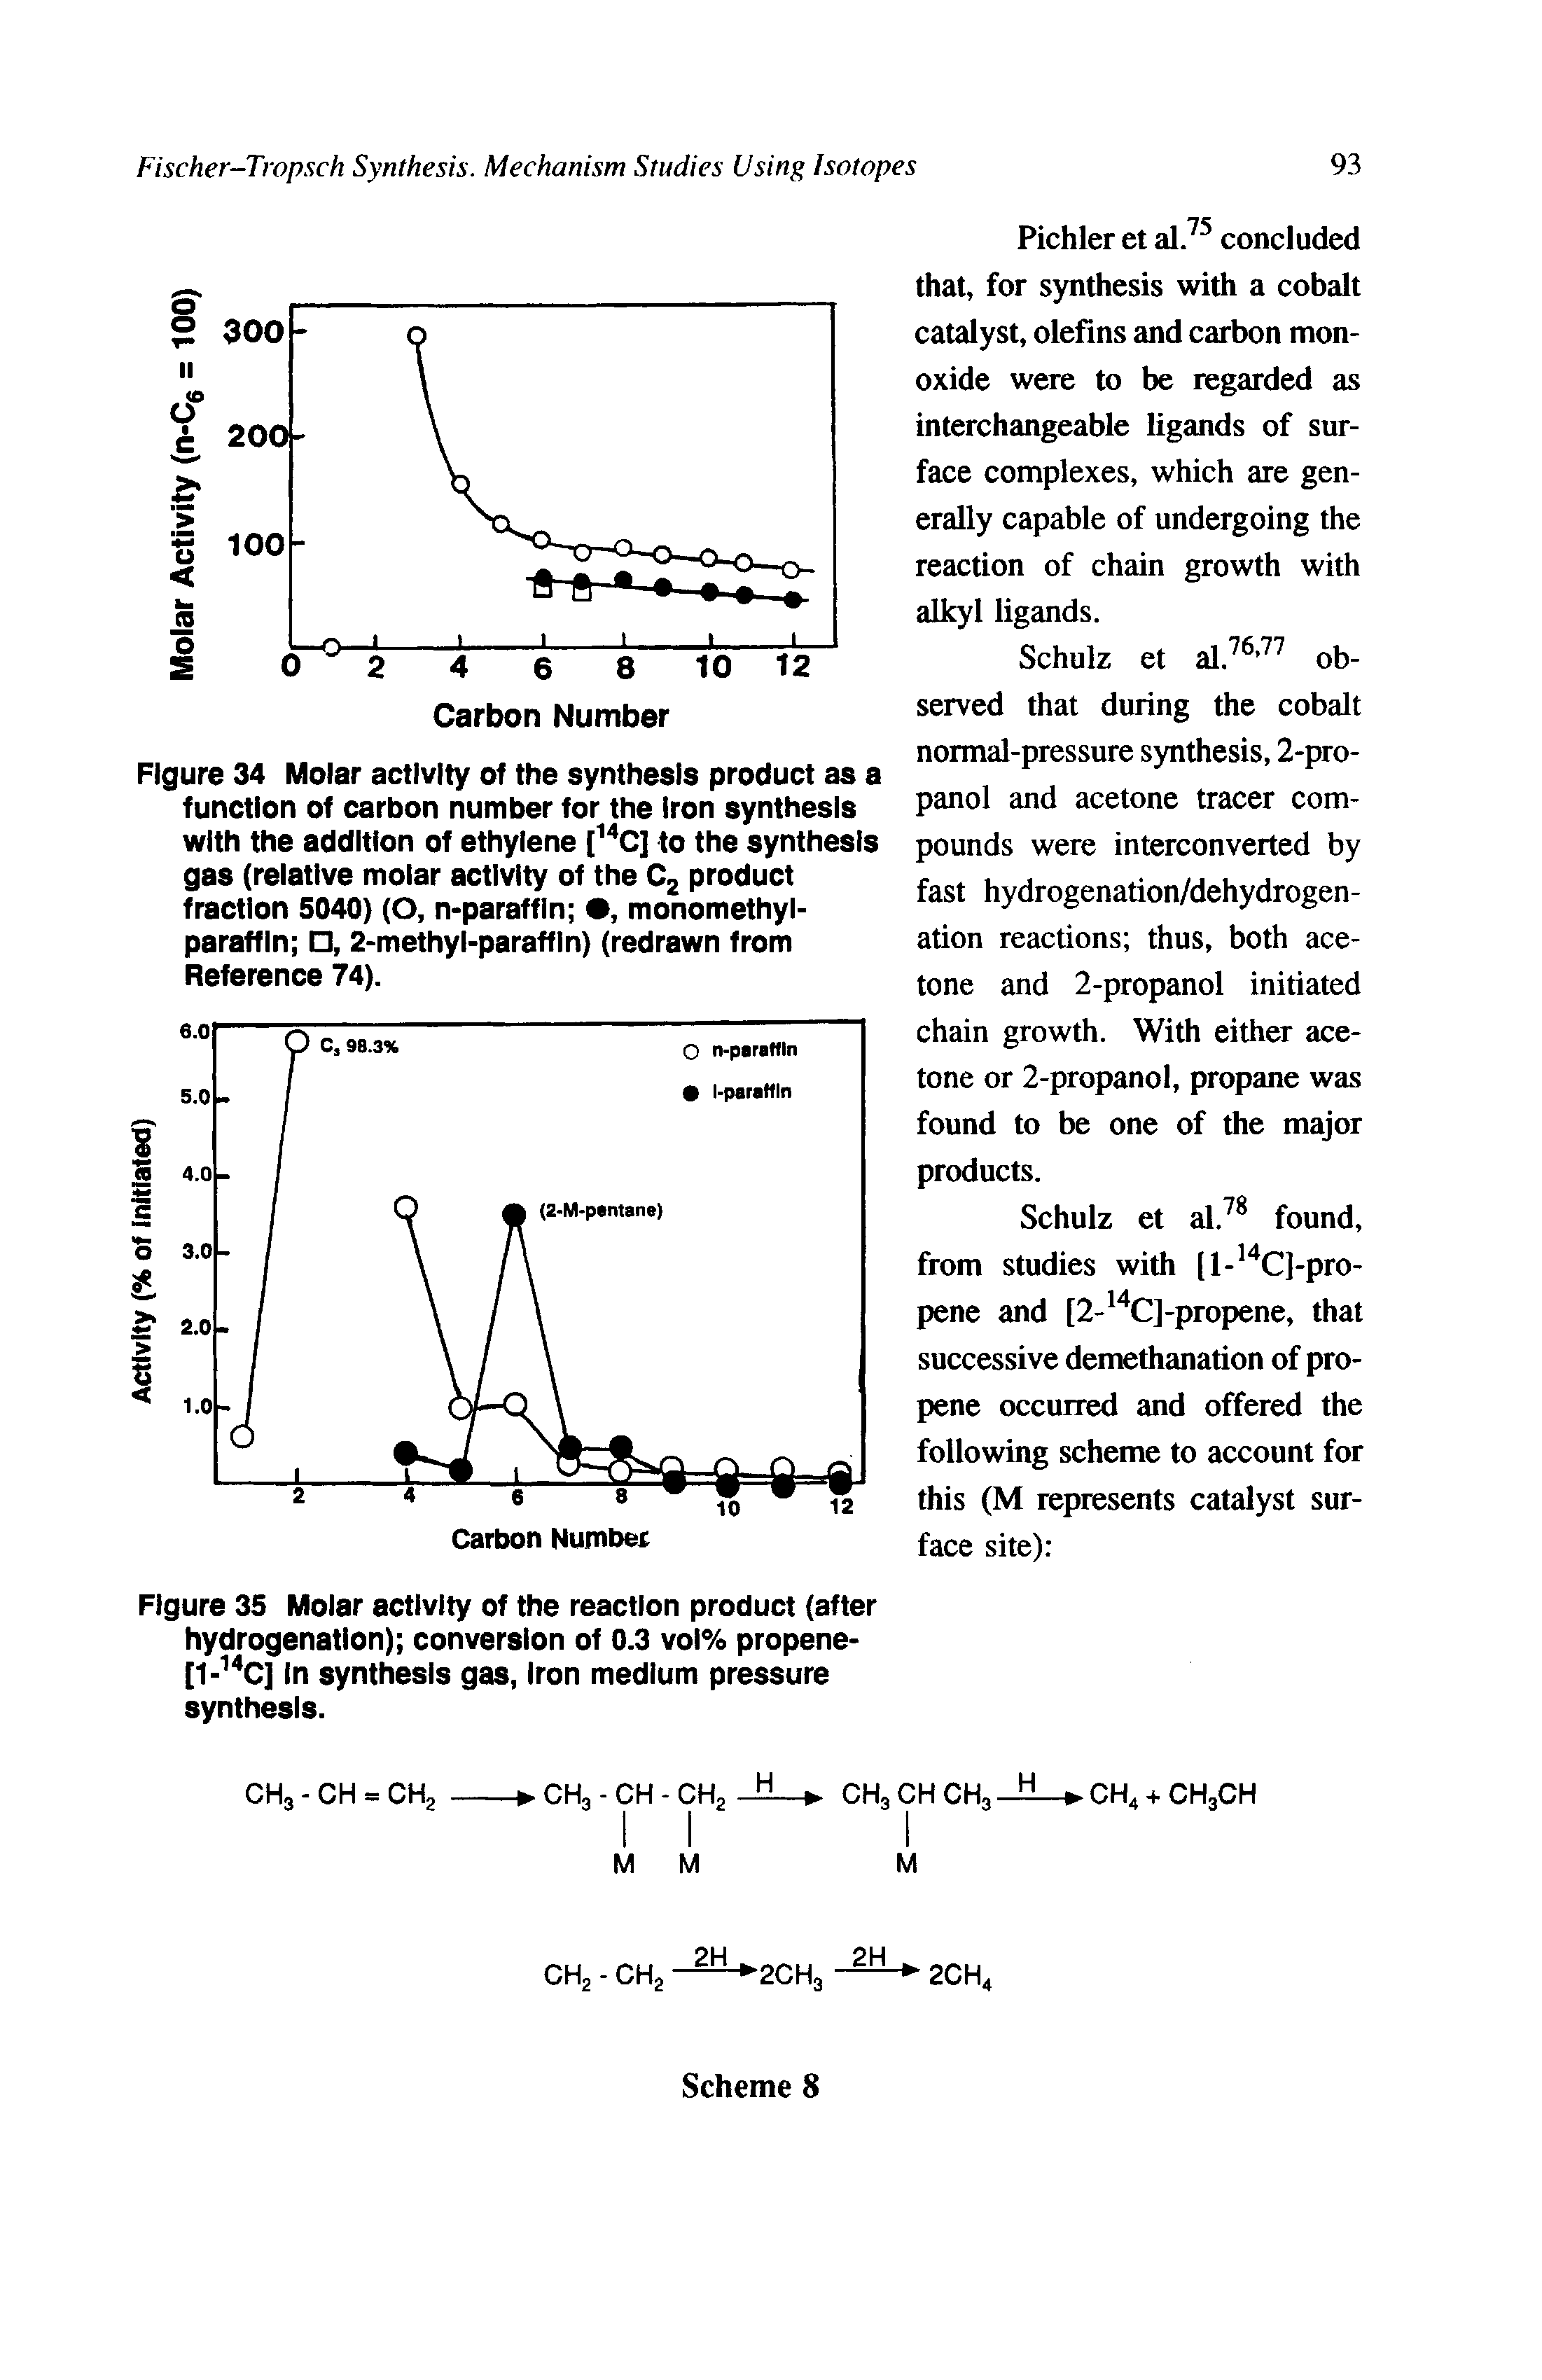 Figure 34 Molar activity of the synthesis product as a function of carbon number for the Iron synthesis with the addition of ethylene [ C] to the synthesis gas (relative molar activity of the C2 product fraction 5040) (O, n paraffln , monomethyl-paraffln , 2-methyl-paraffln) (redrawn from Reference 74).